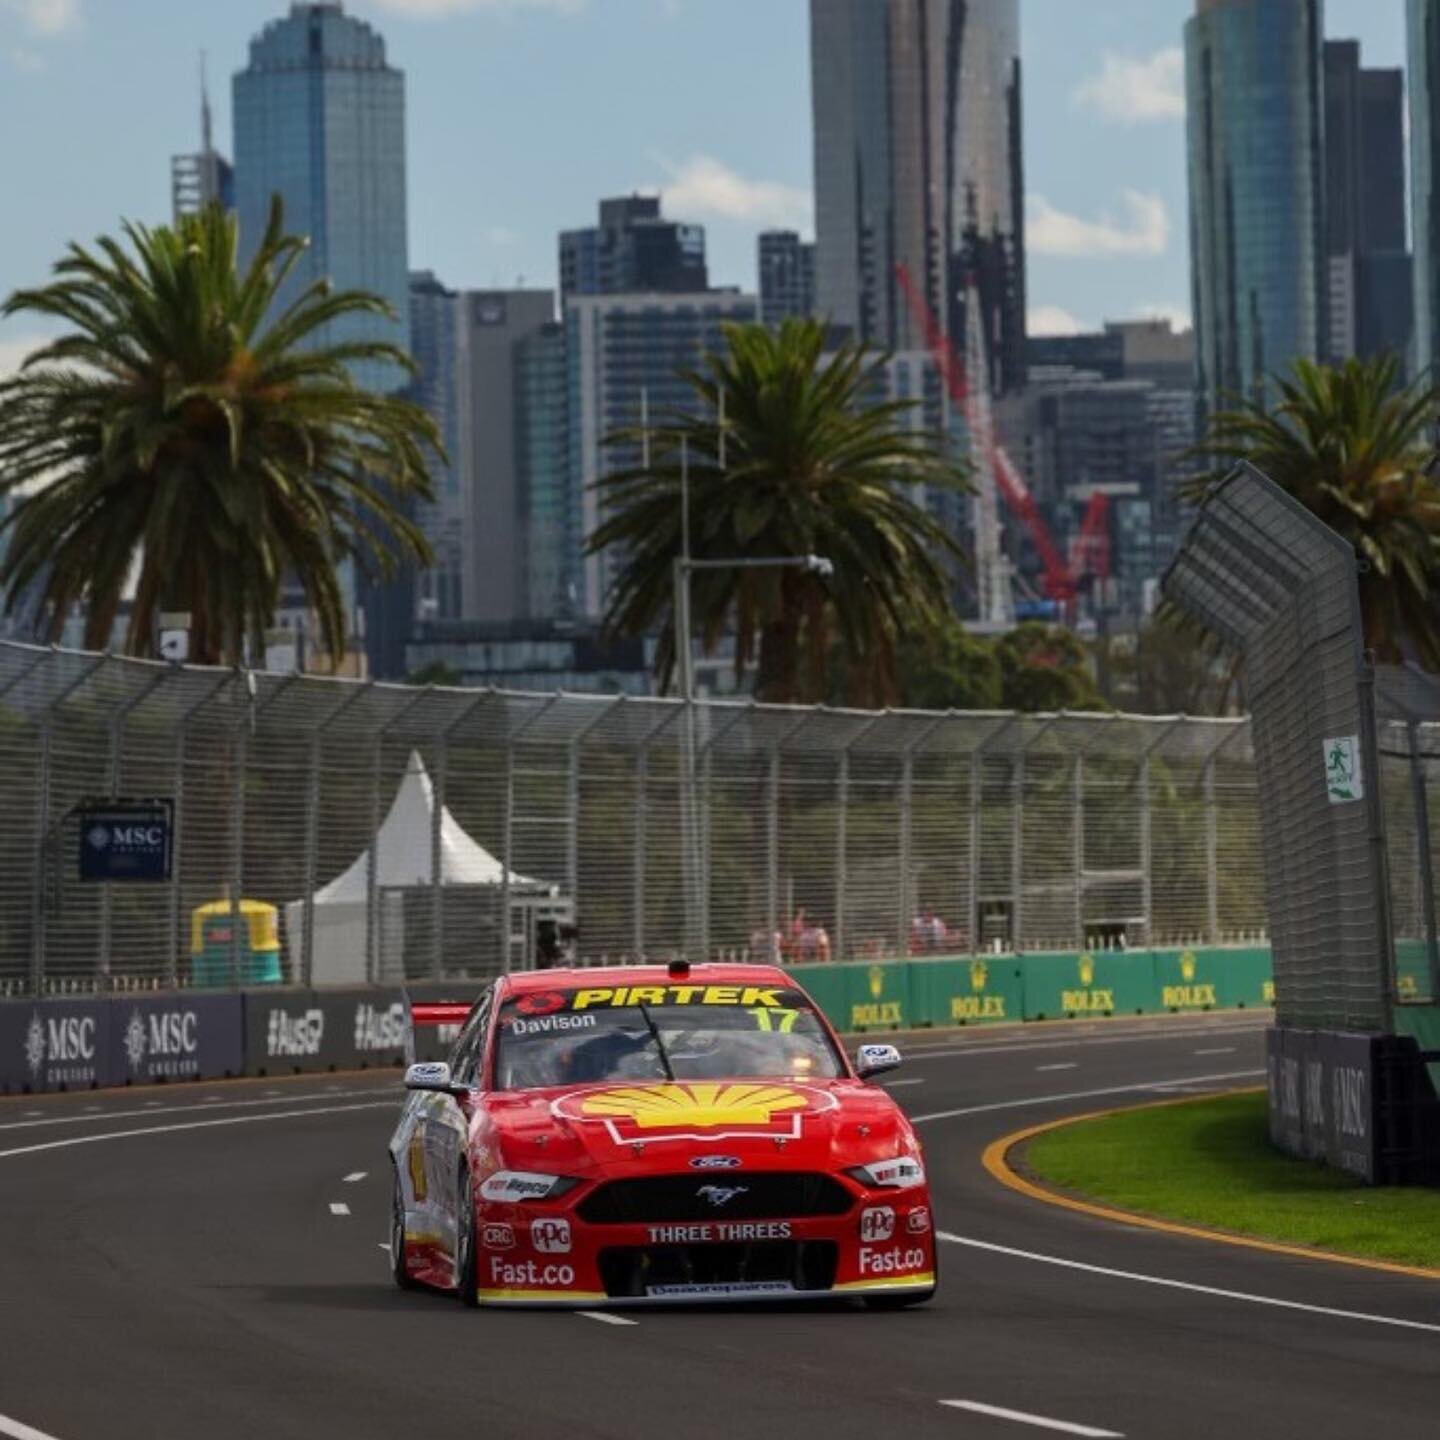 @willdavison__ and @thomasmaxwellracing on track today for the Blue Chip personnel! We are looking forward to seeing how it all plays out. 

We are back on graphics duty for the boys in 2023. Swipe left for the track map of Albert Park 👈🏻